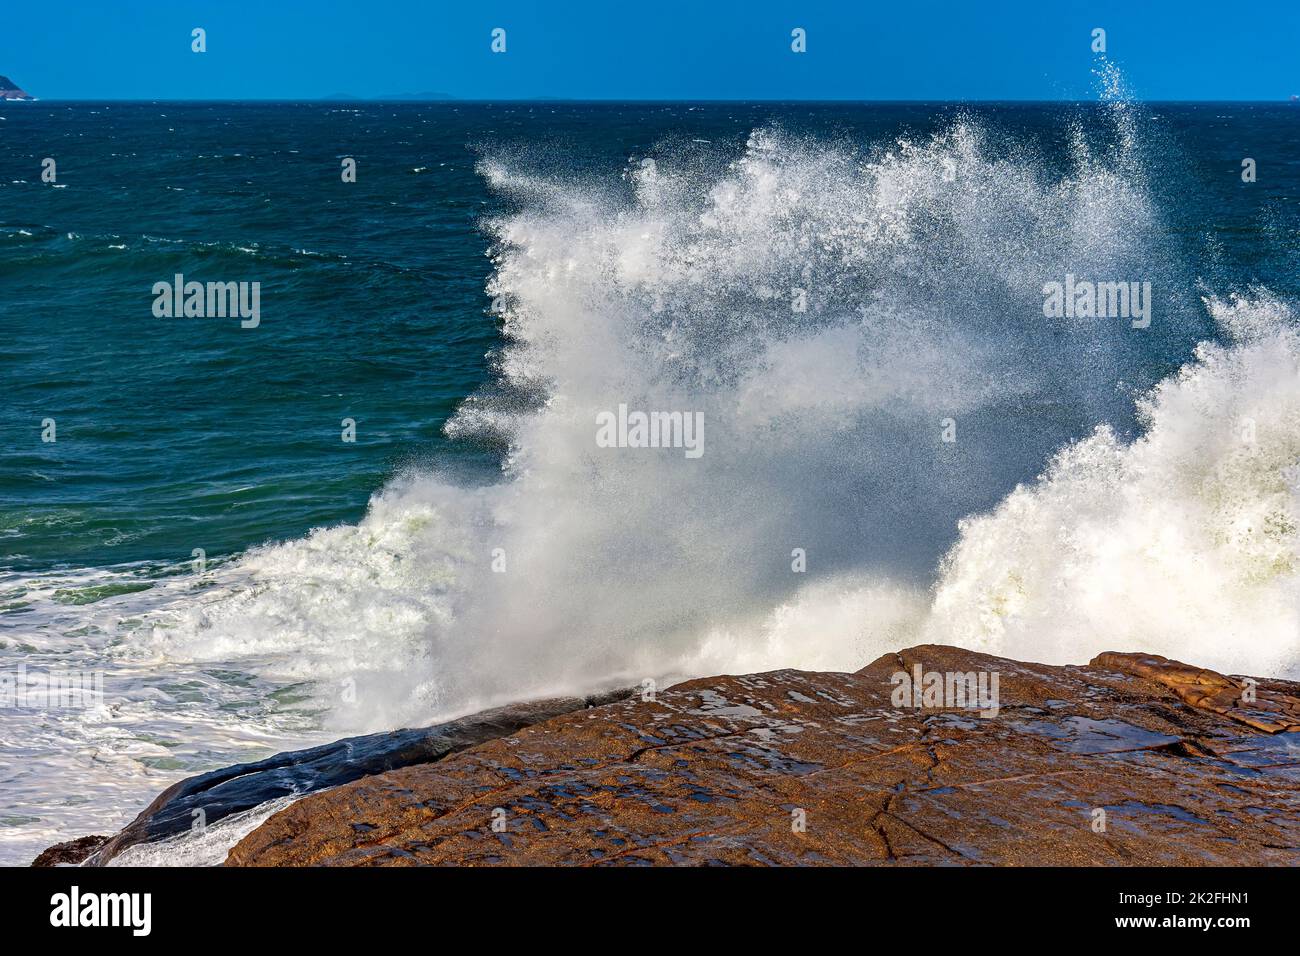 Stormy wave splashing into the air Stock Photo